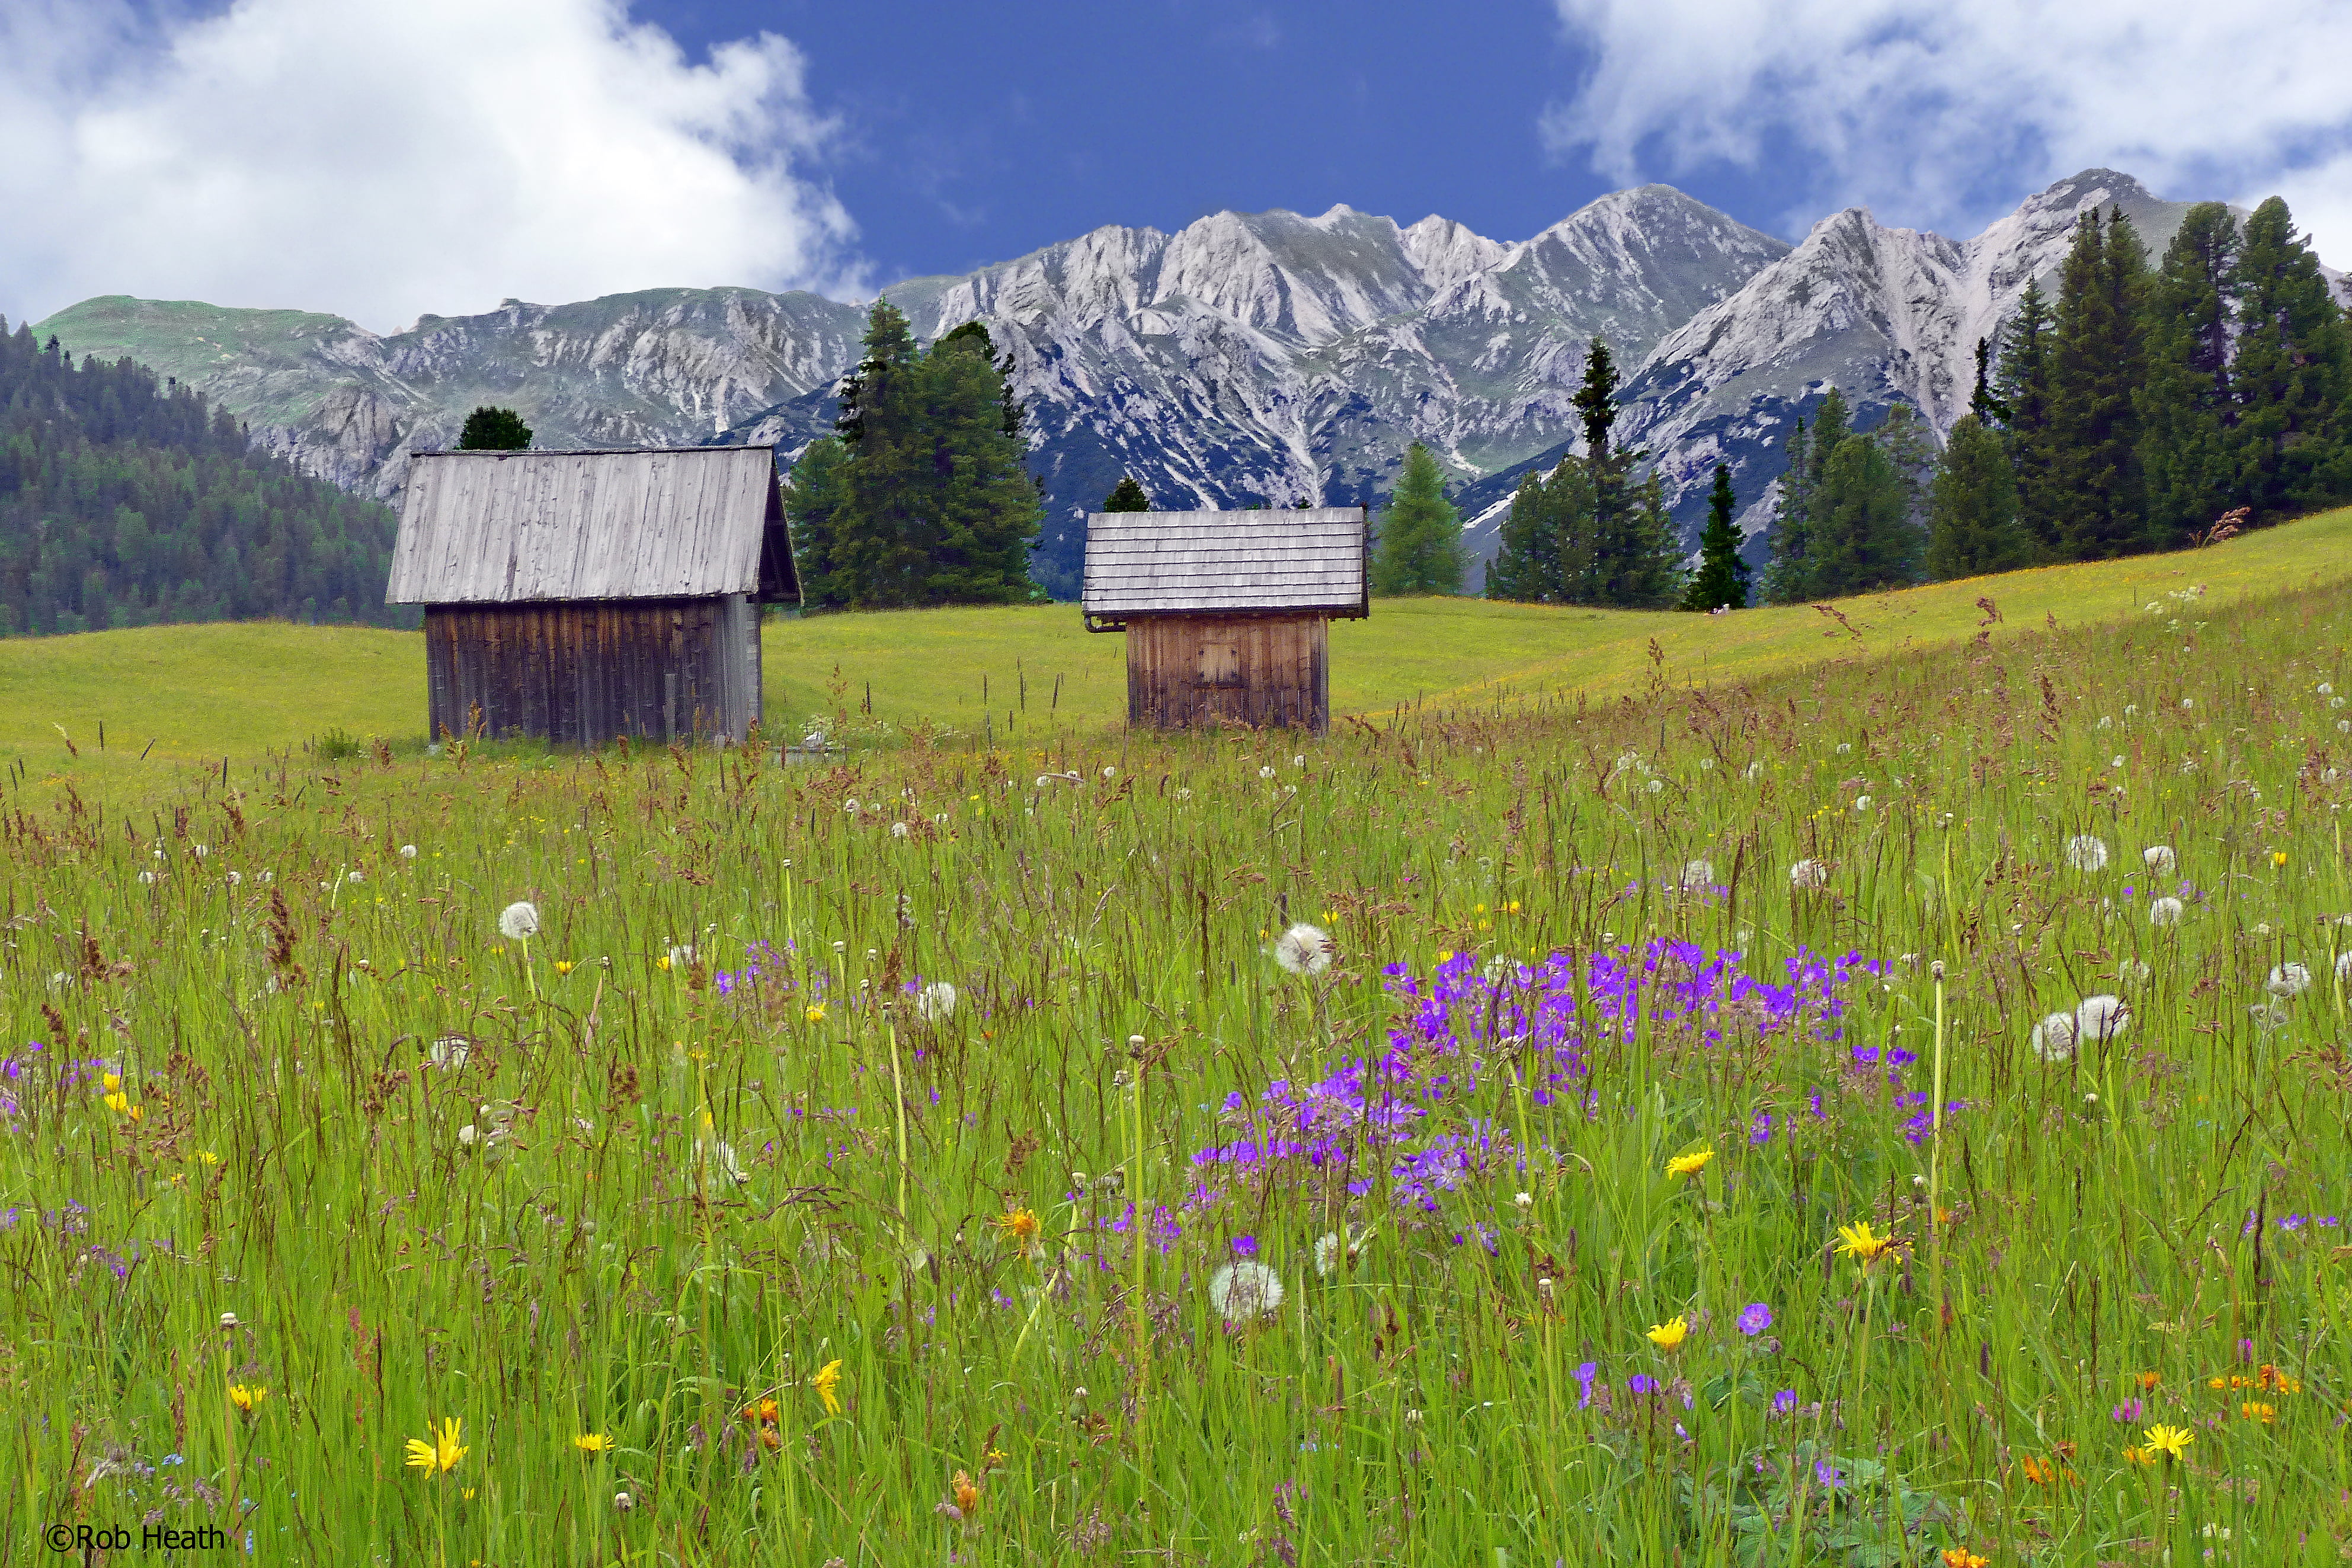 photo of two brown sheds on grass field with overlooking snowy mountain, prato, prato